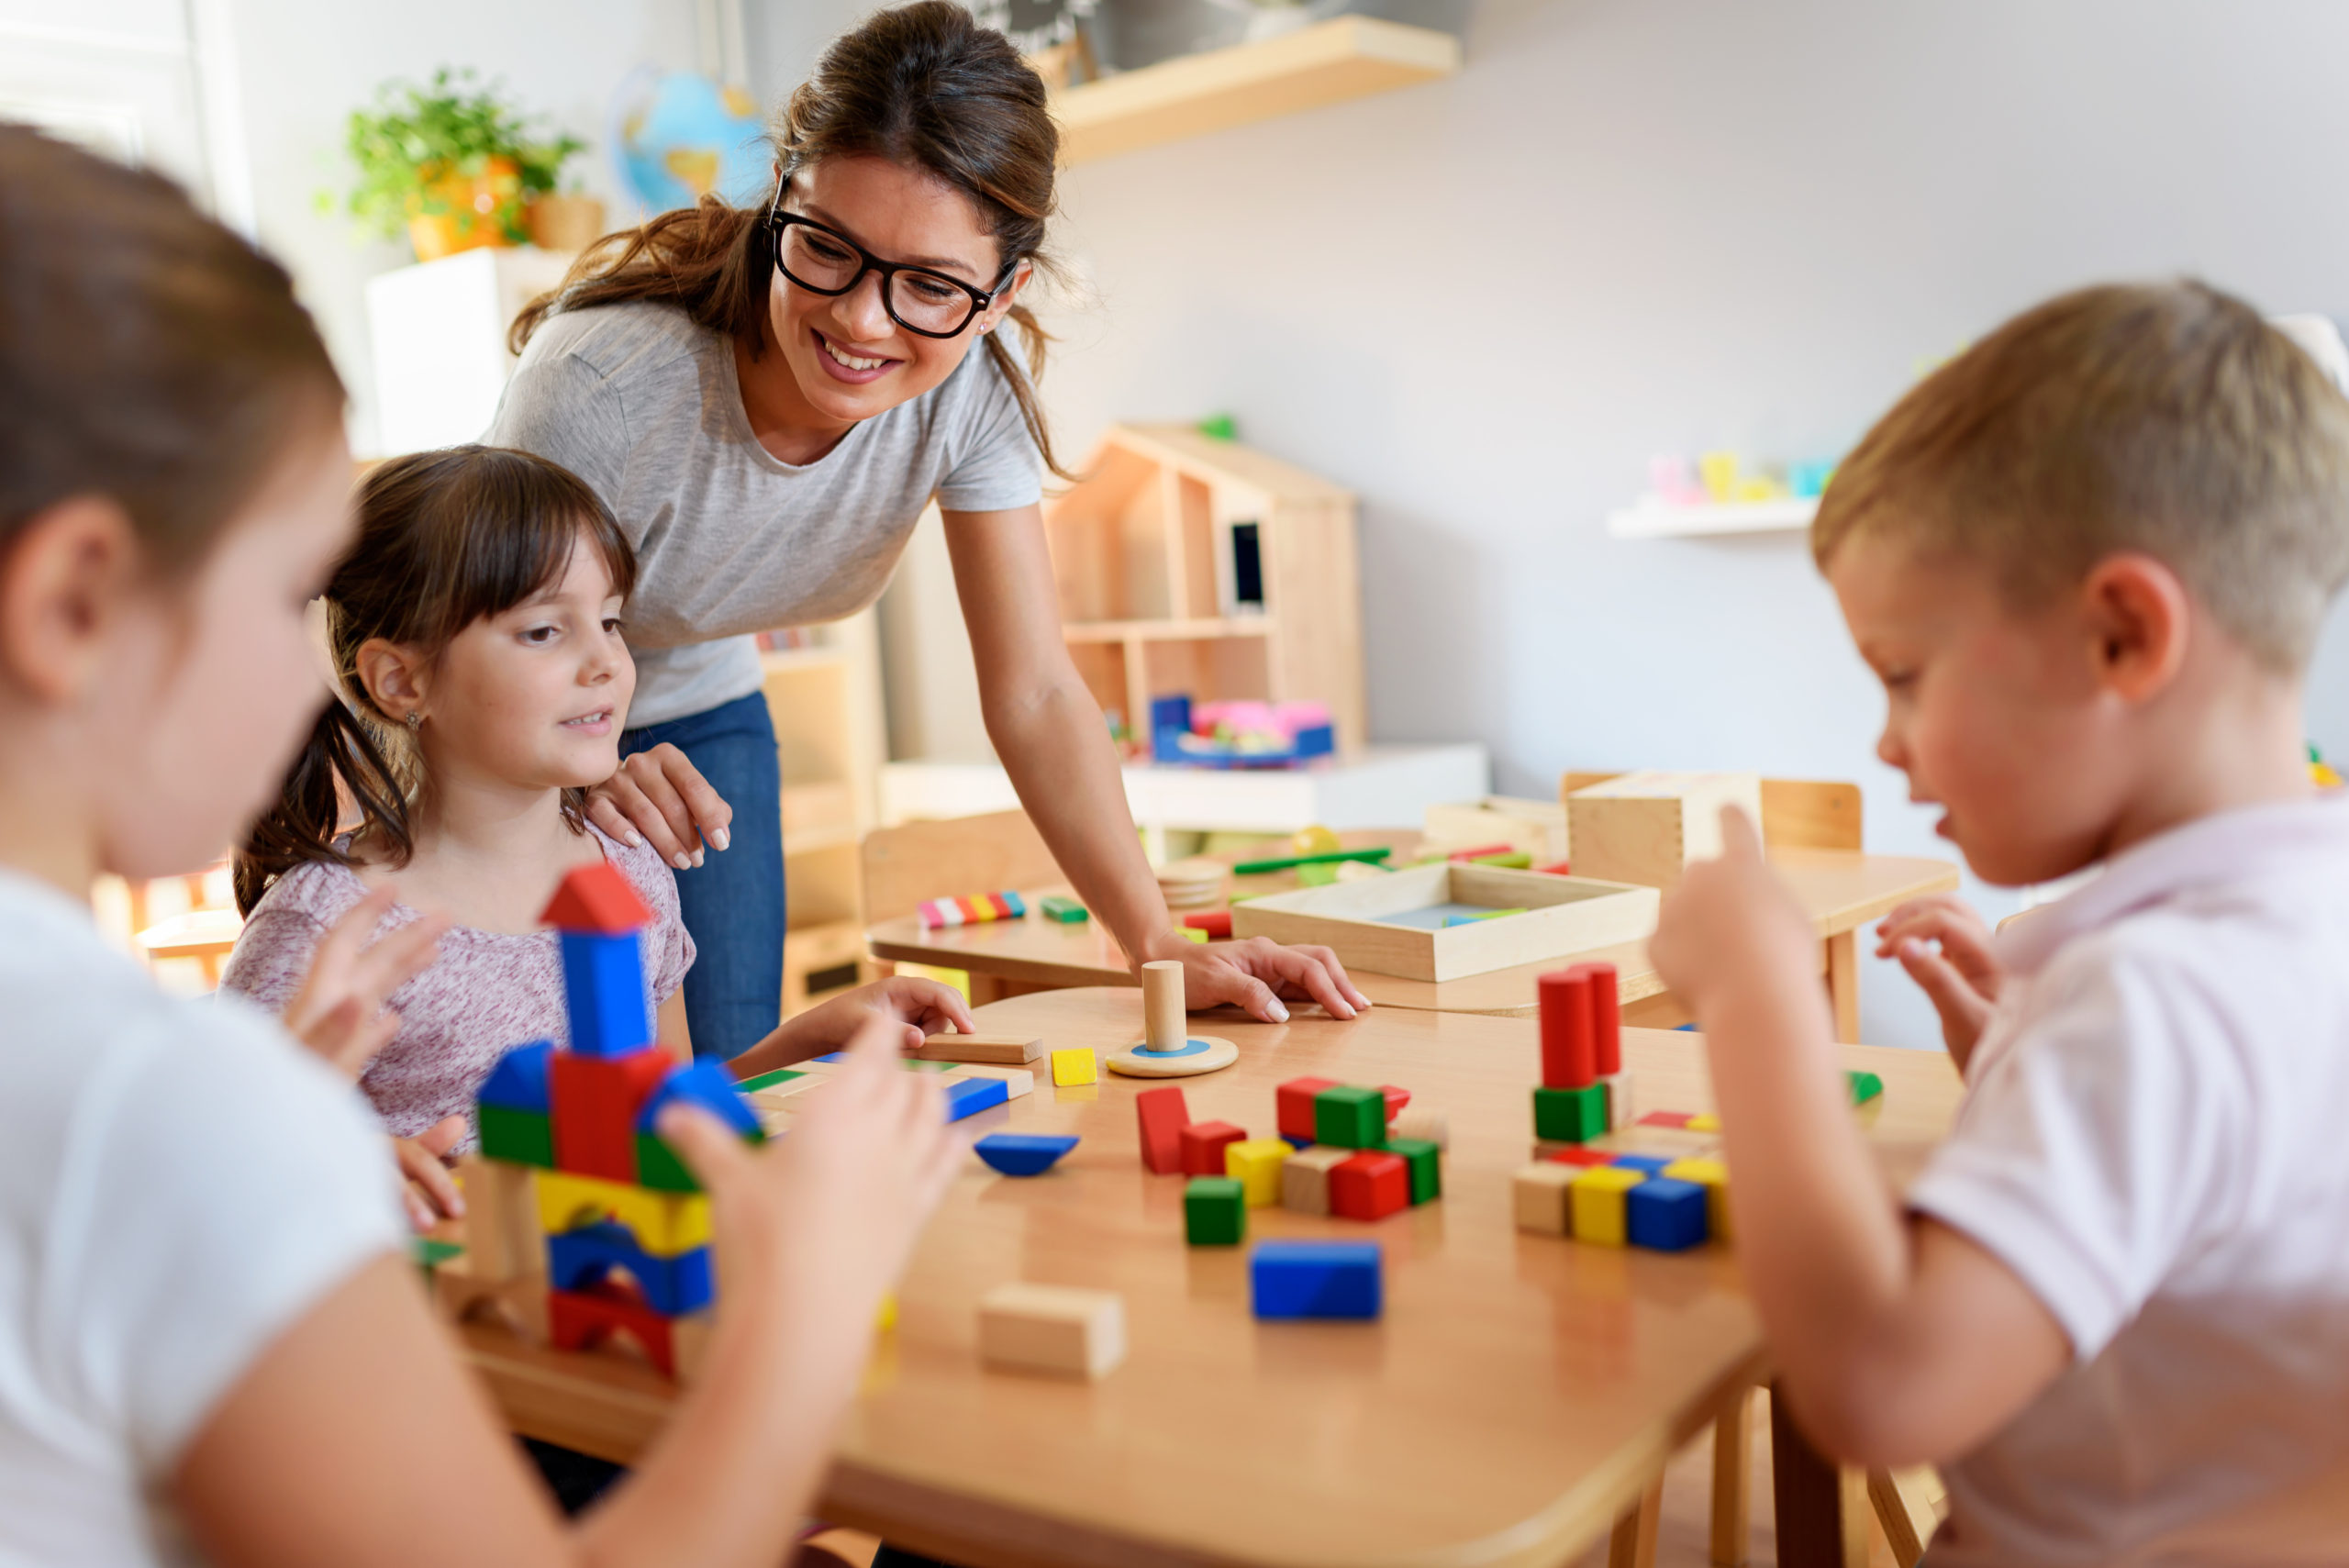 Preschool teacher with children playing with colorful wooden didactic toys at kindergarten